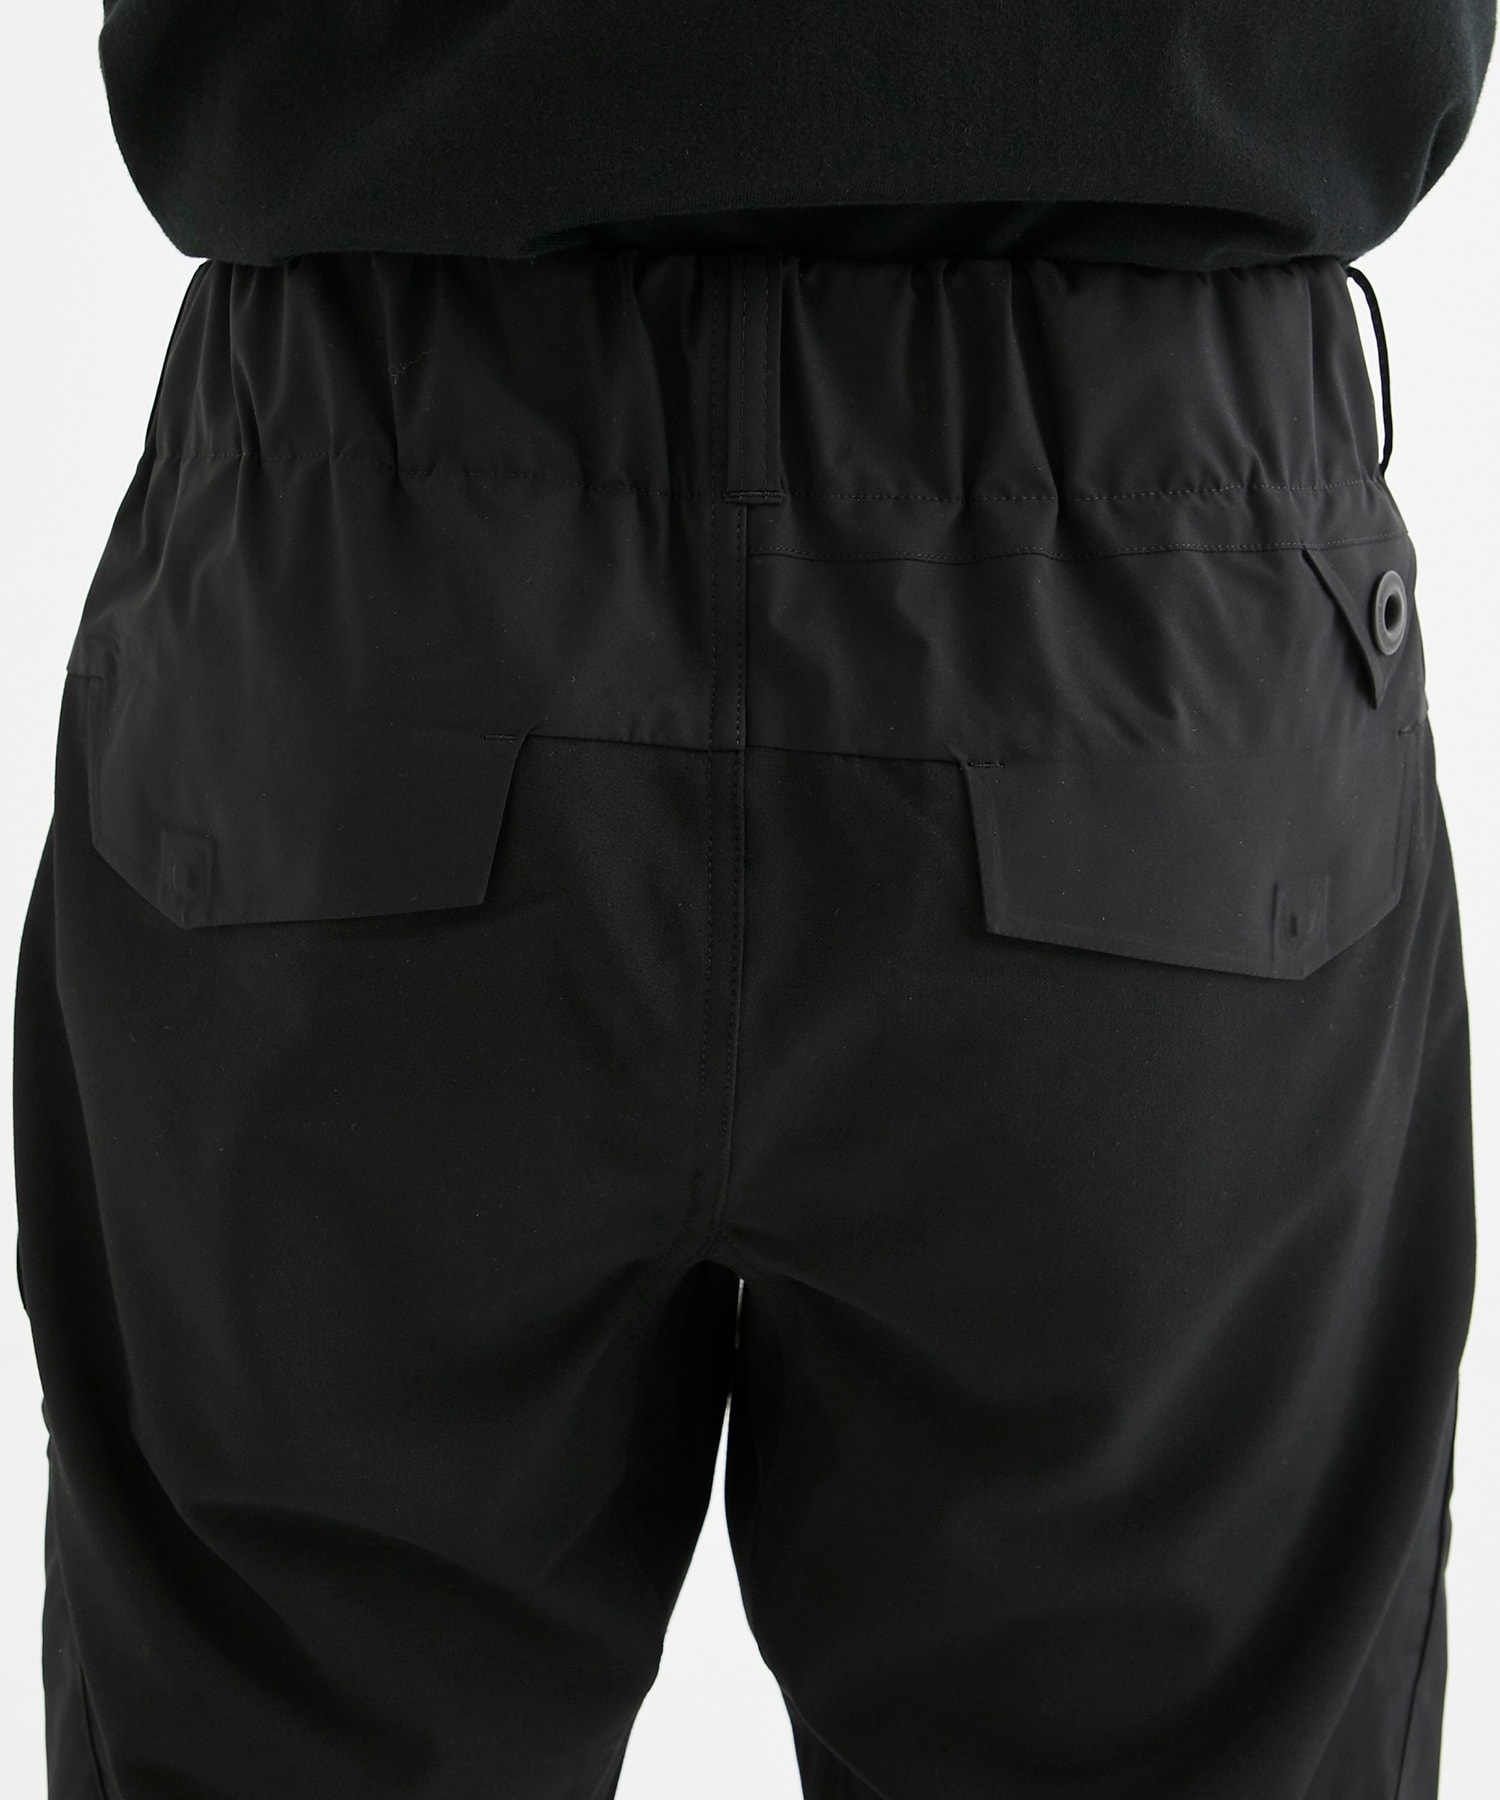 EX. STRETCHED HYBRID JOGGER PANTS White Mountaineering